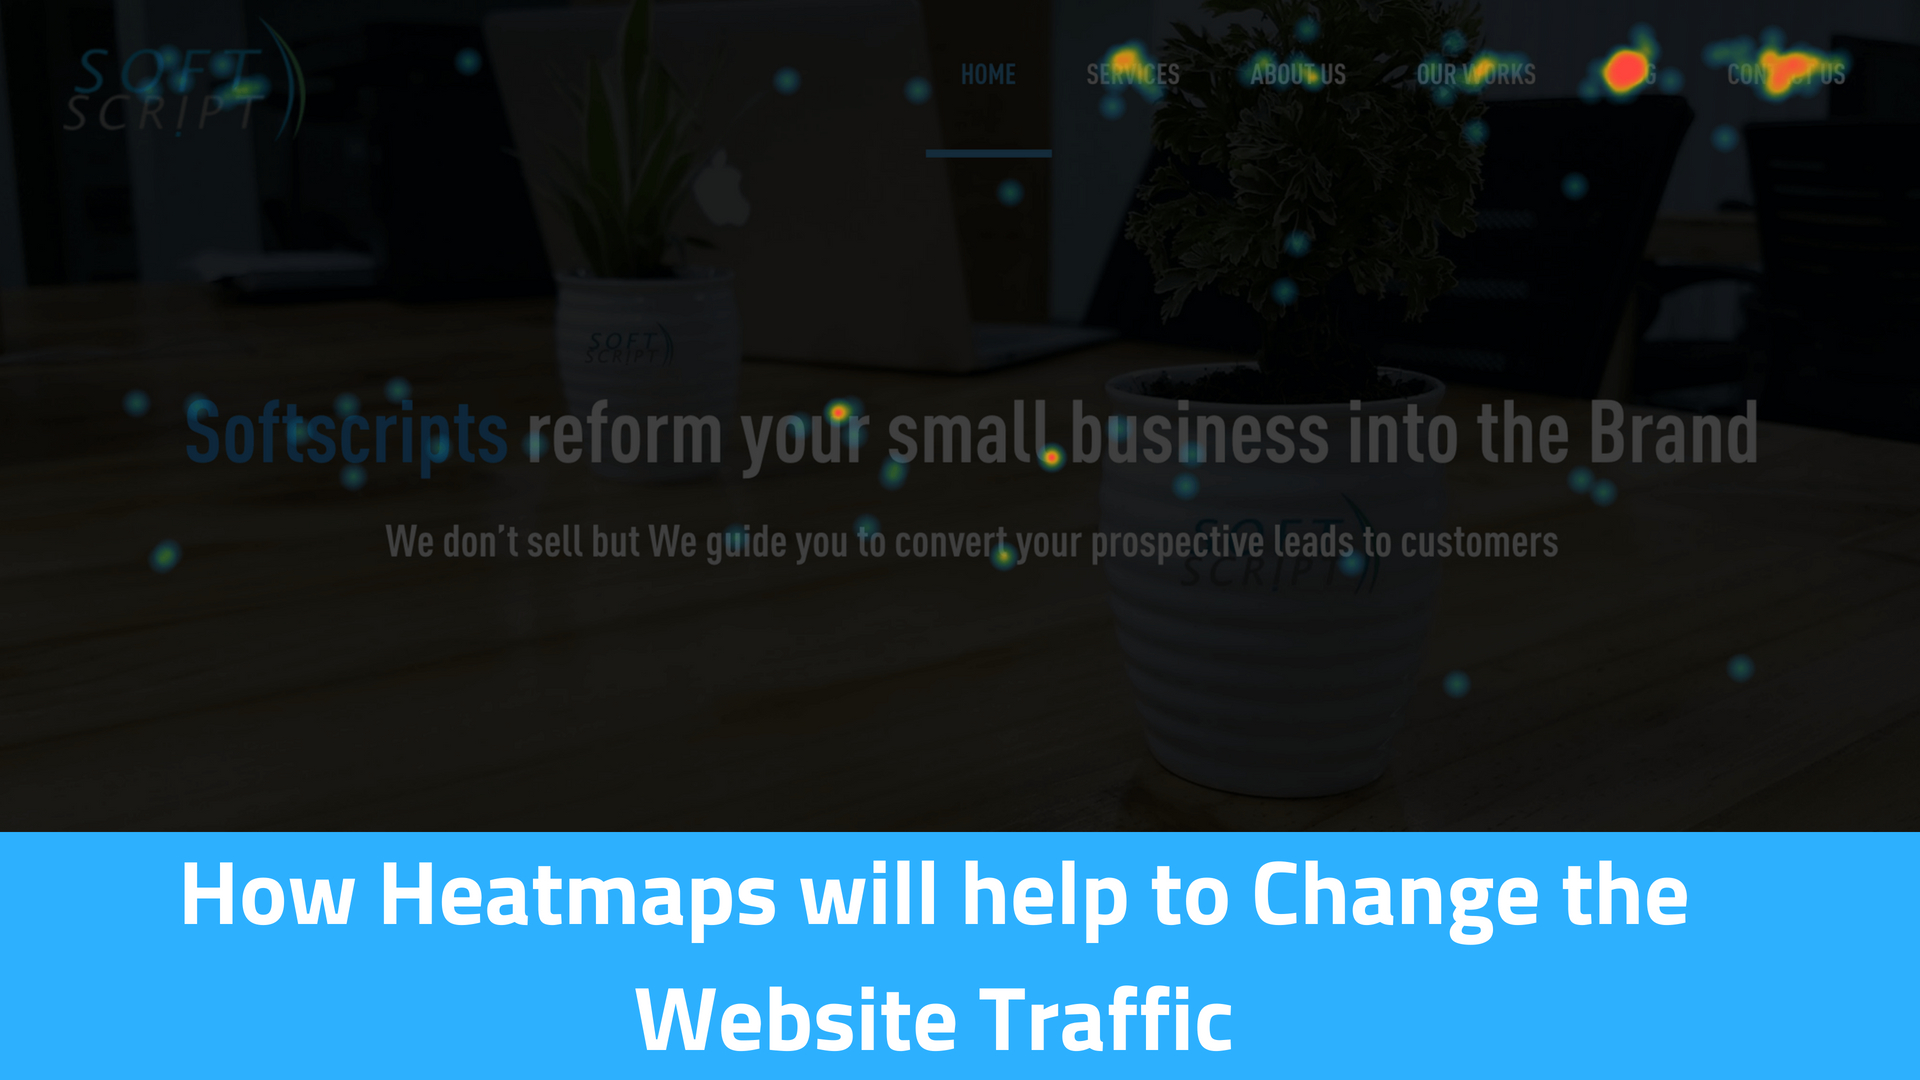 How Heat Maps could help to Change Websites Traffic?